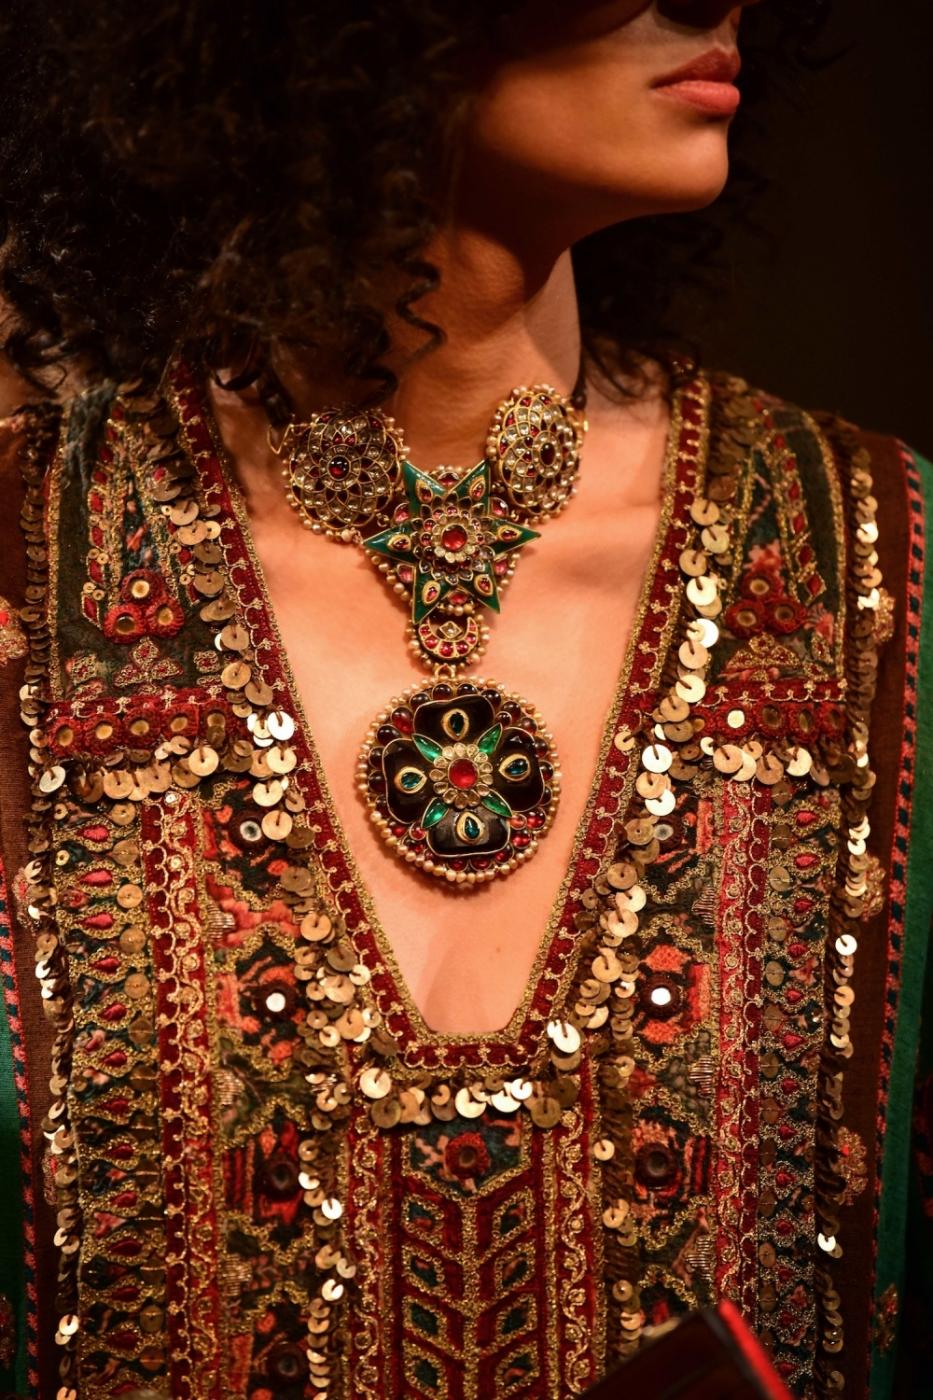 New Delhi: A model showcases "Kashgaar Bazaar" collection, a creation by fashion designer Sabyasachi Mukherjee on the 20th year celebrations of his brand "Sabyasachi", in New Delhi, on April 6, 2019. (Photo: IANS) by . 